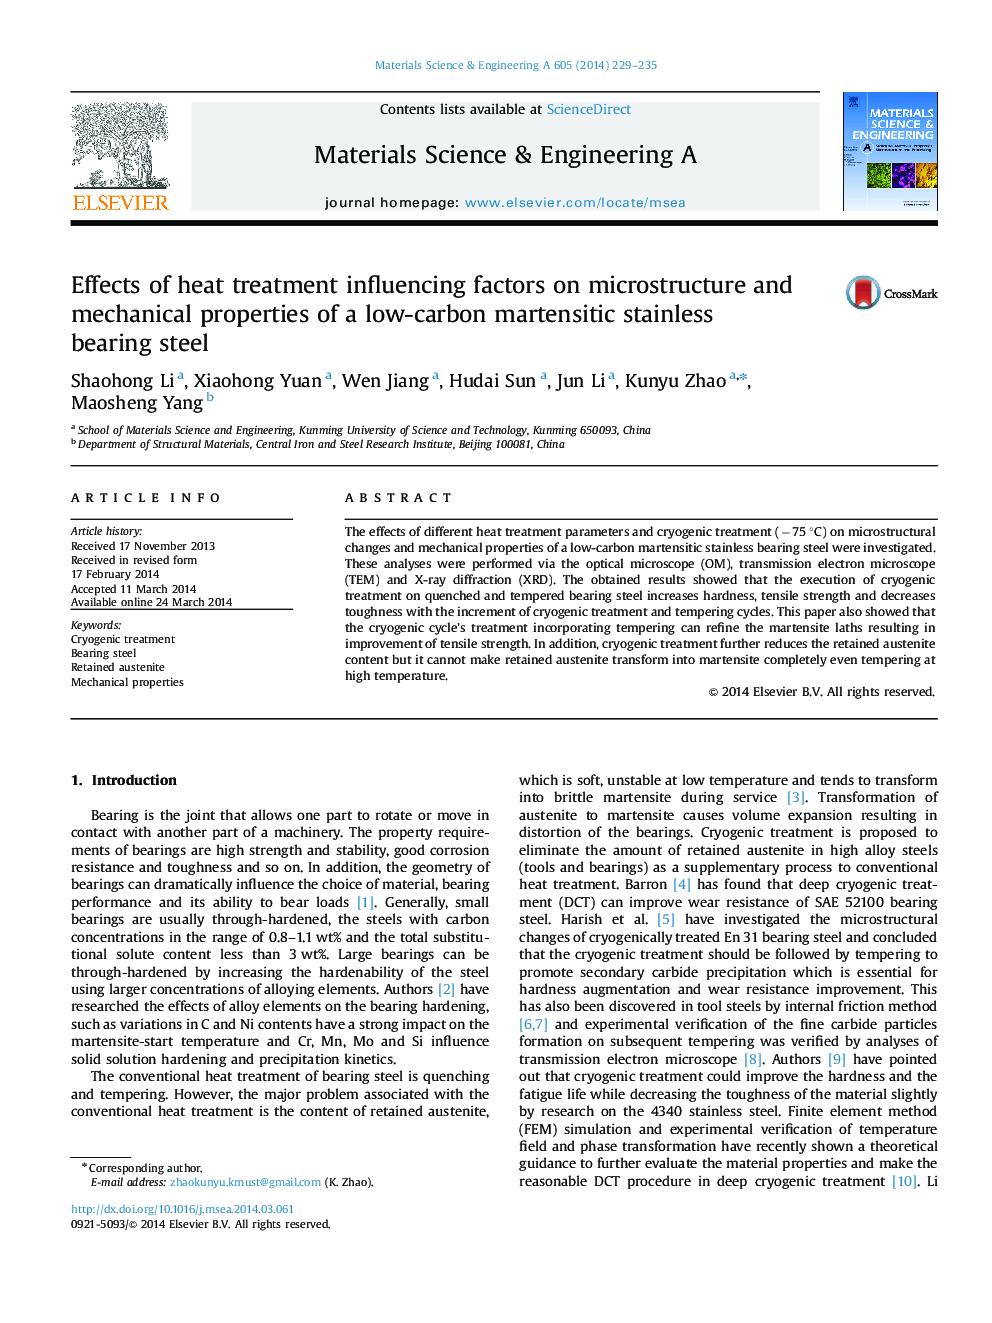 Effects of heat treatment influencing factors on microstructure and mechanical properties of a low-carbon martensitic stainless bearing steel